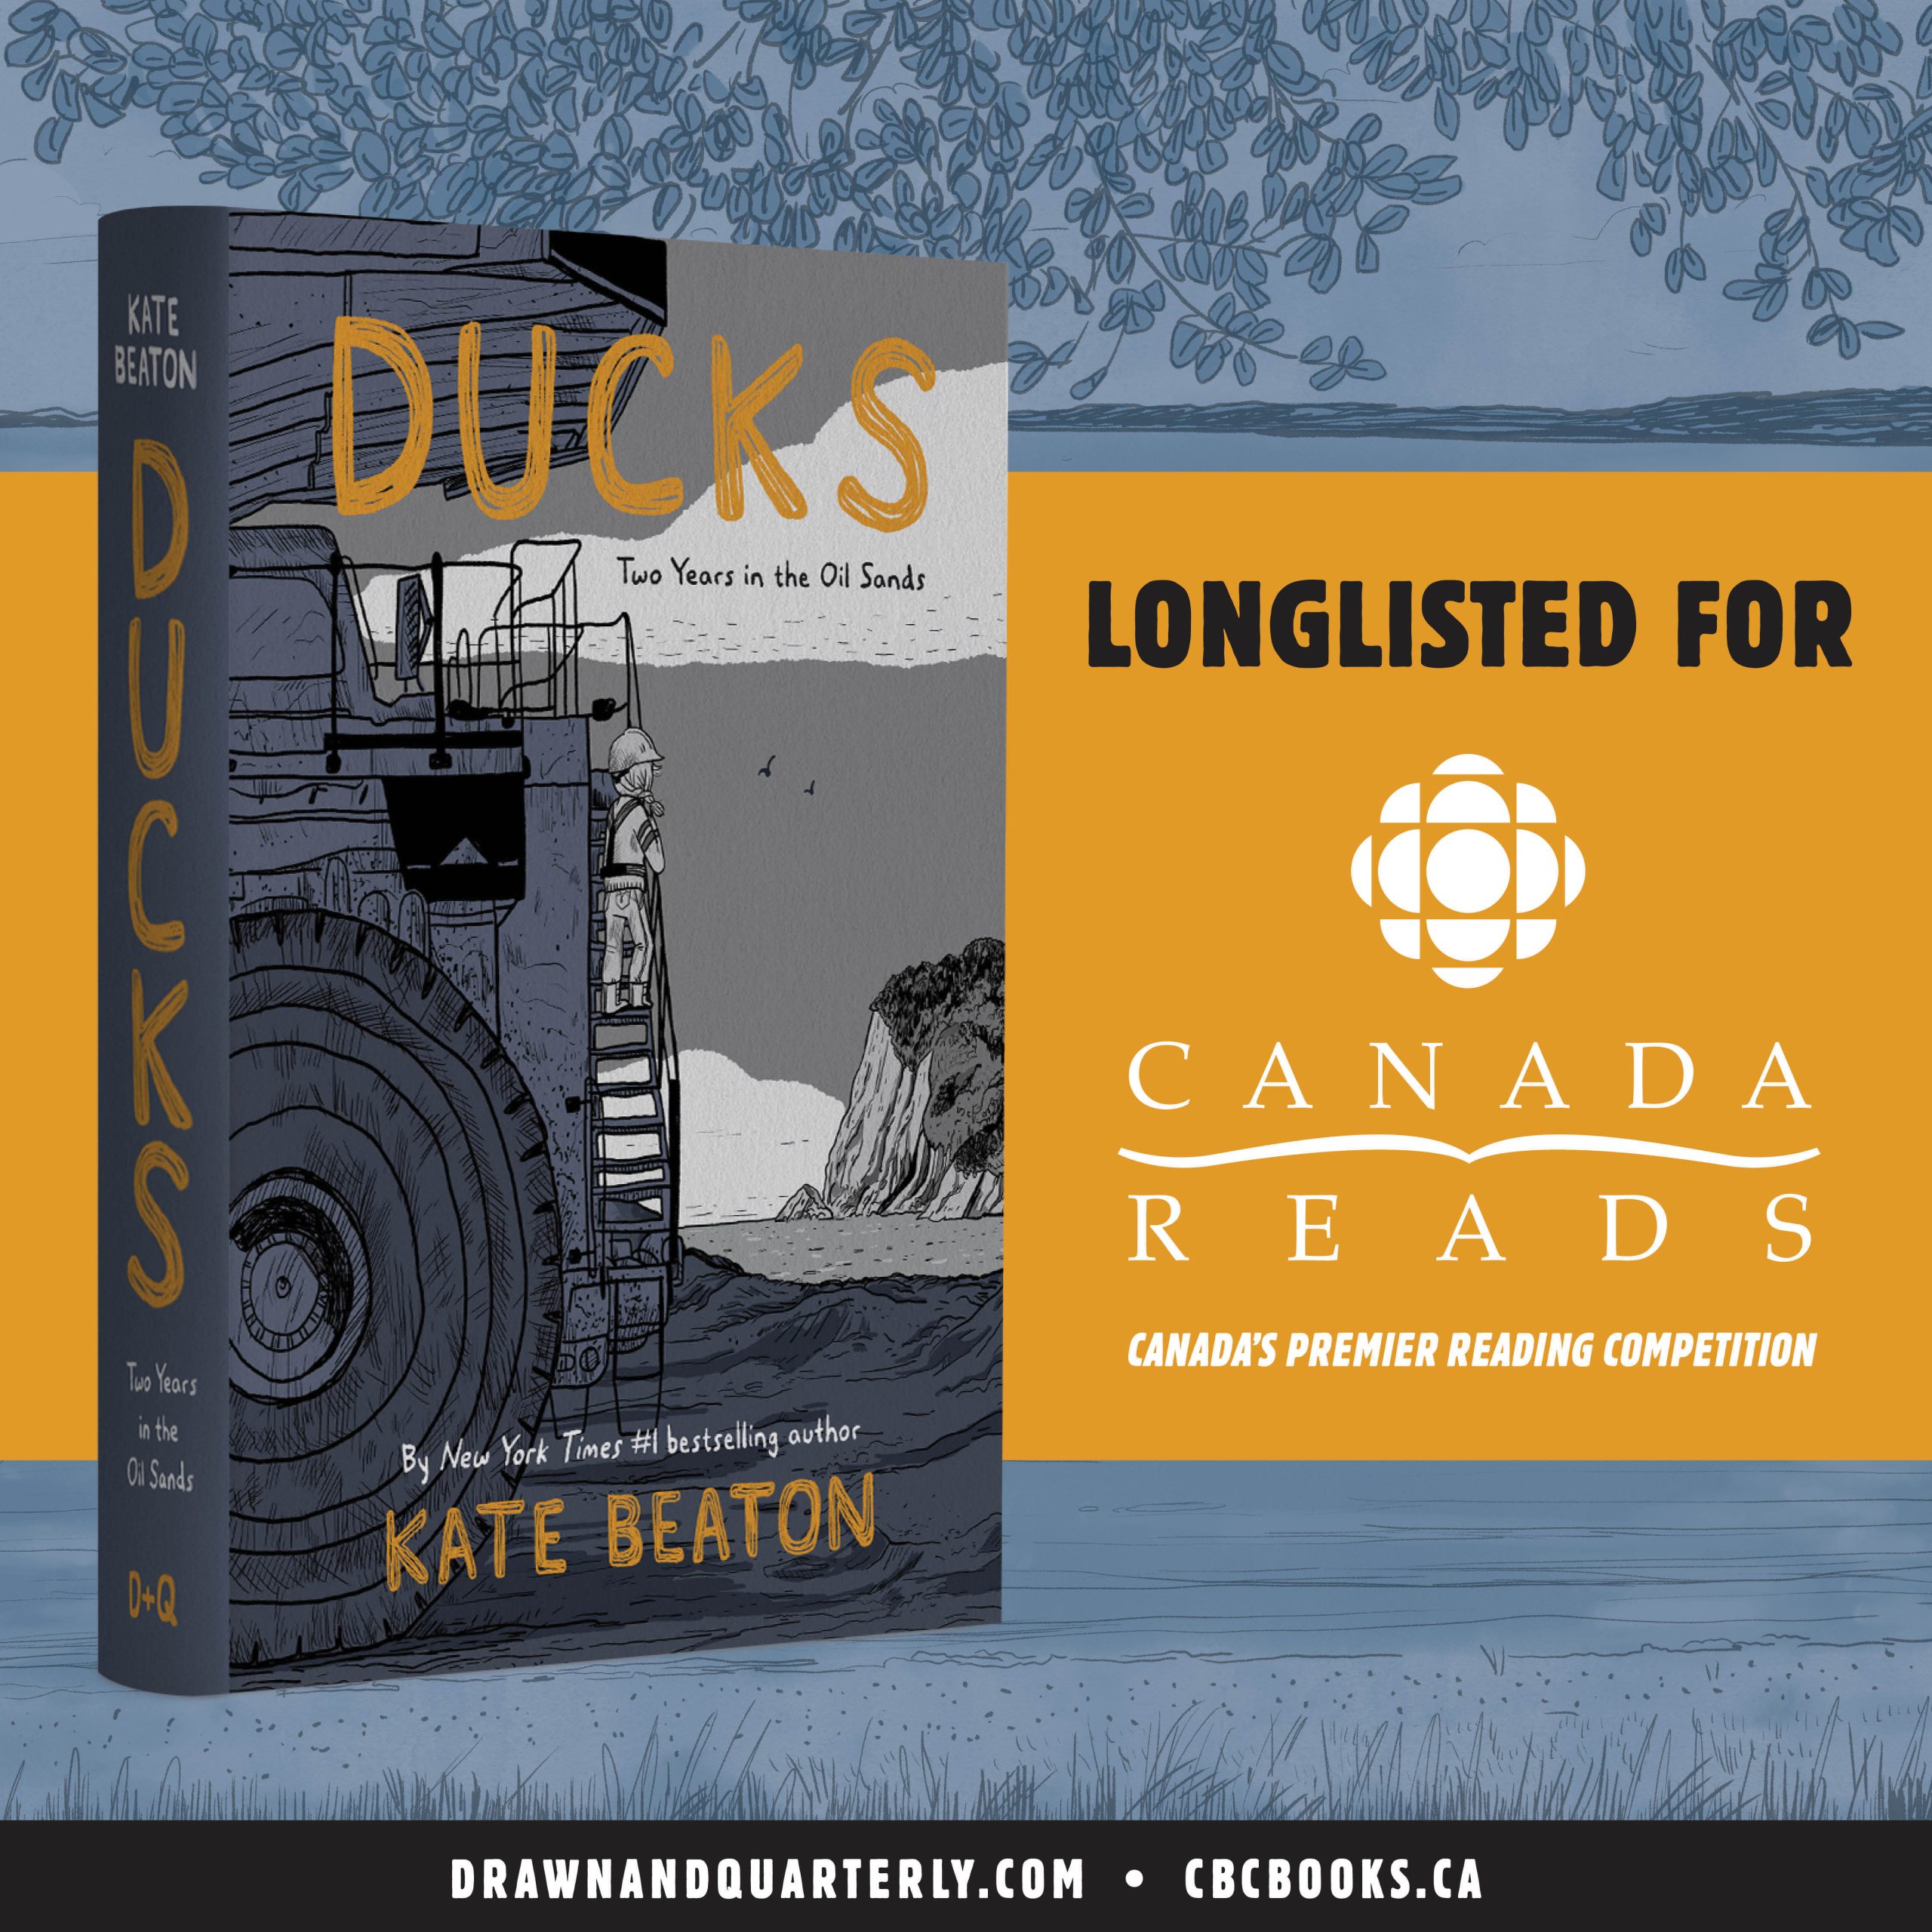 Ducks is longlisted for CBC’s Canada Reads! Drawn & Quarterly